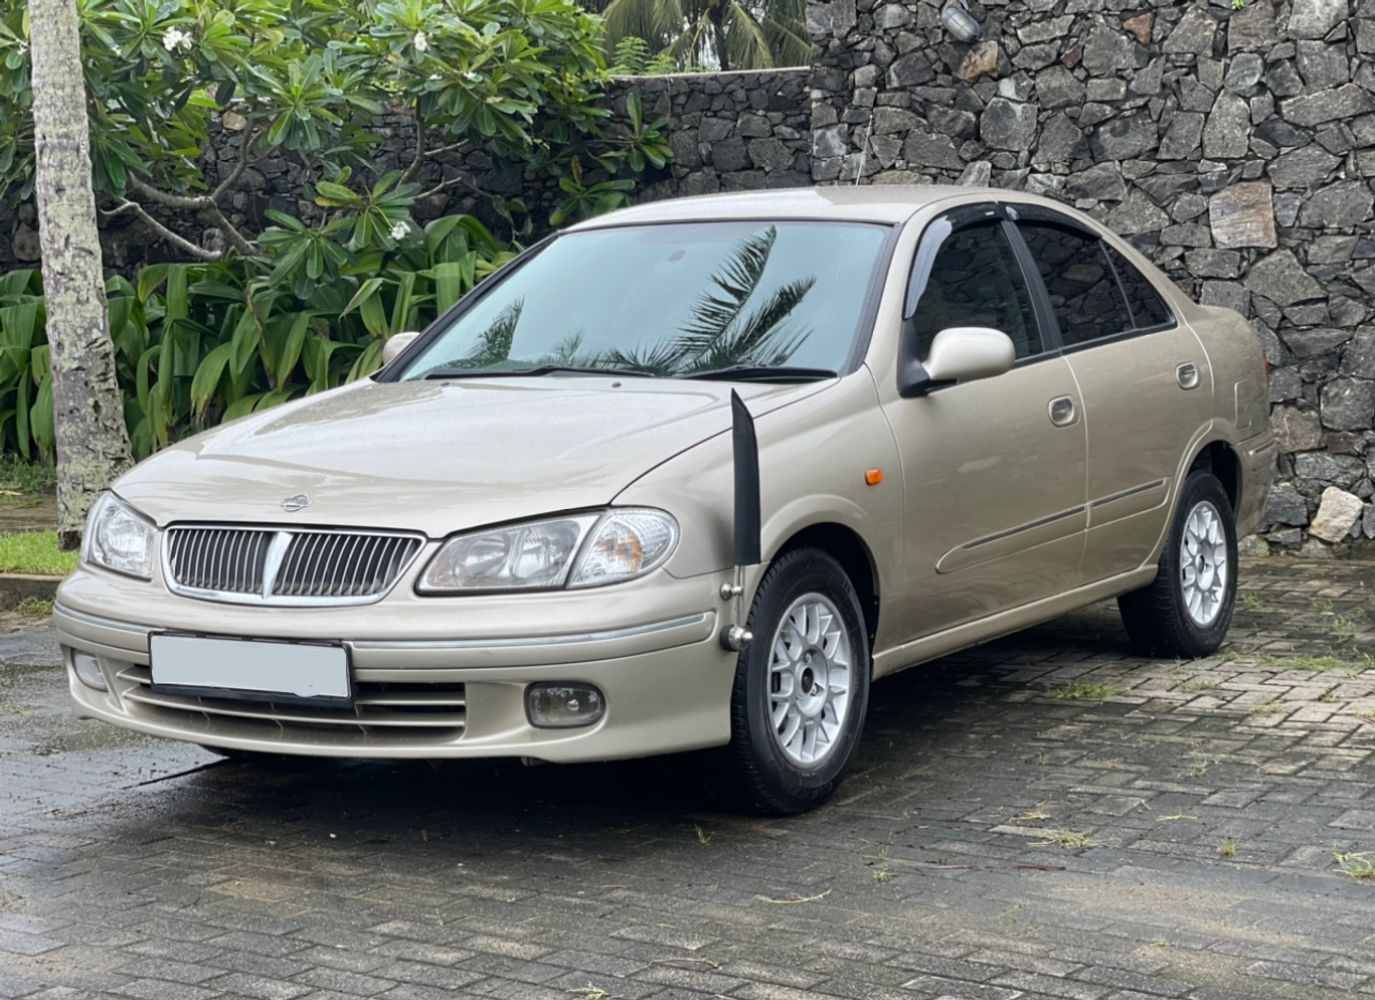 Nissan Sunny 2007 Review